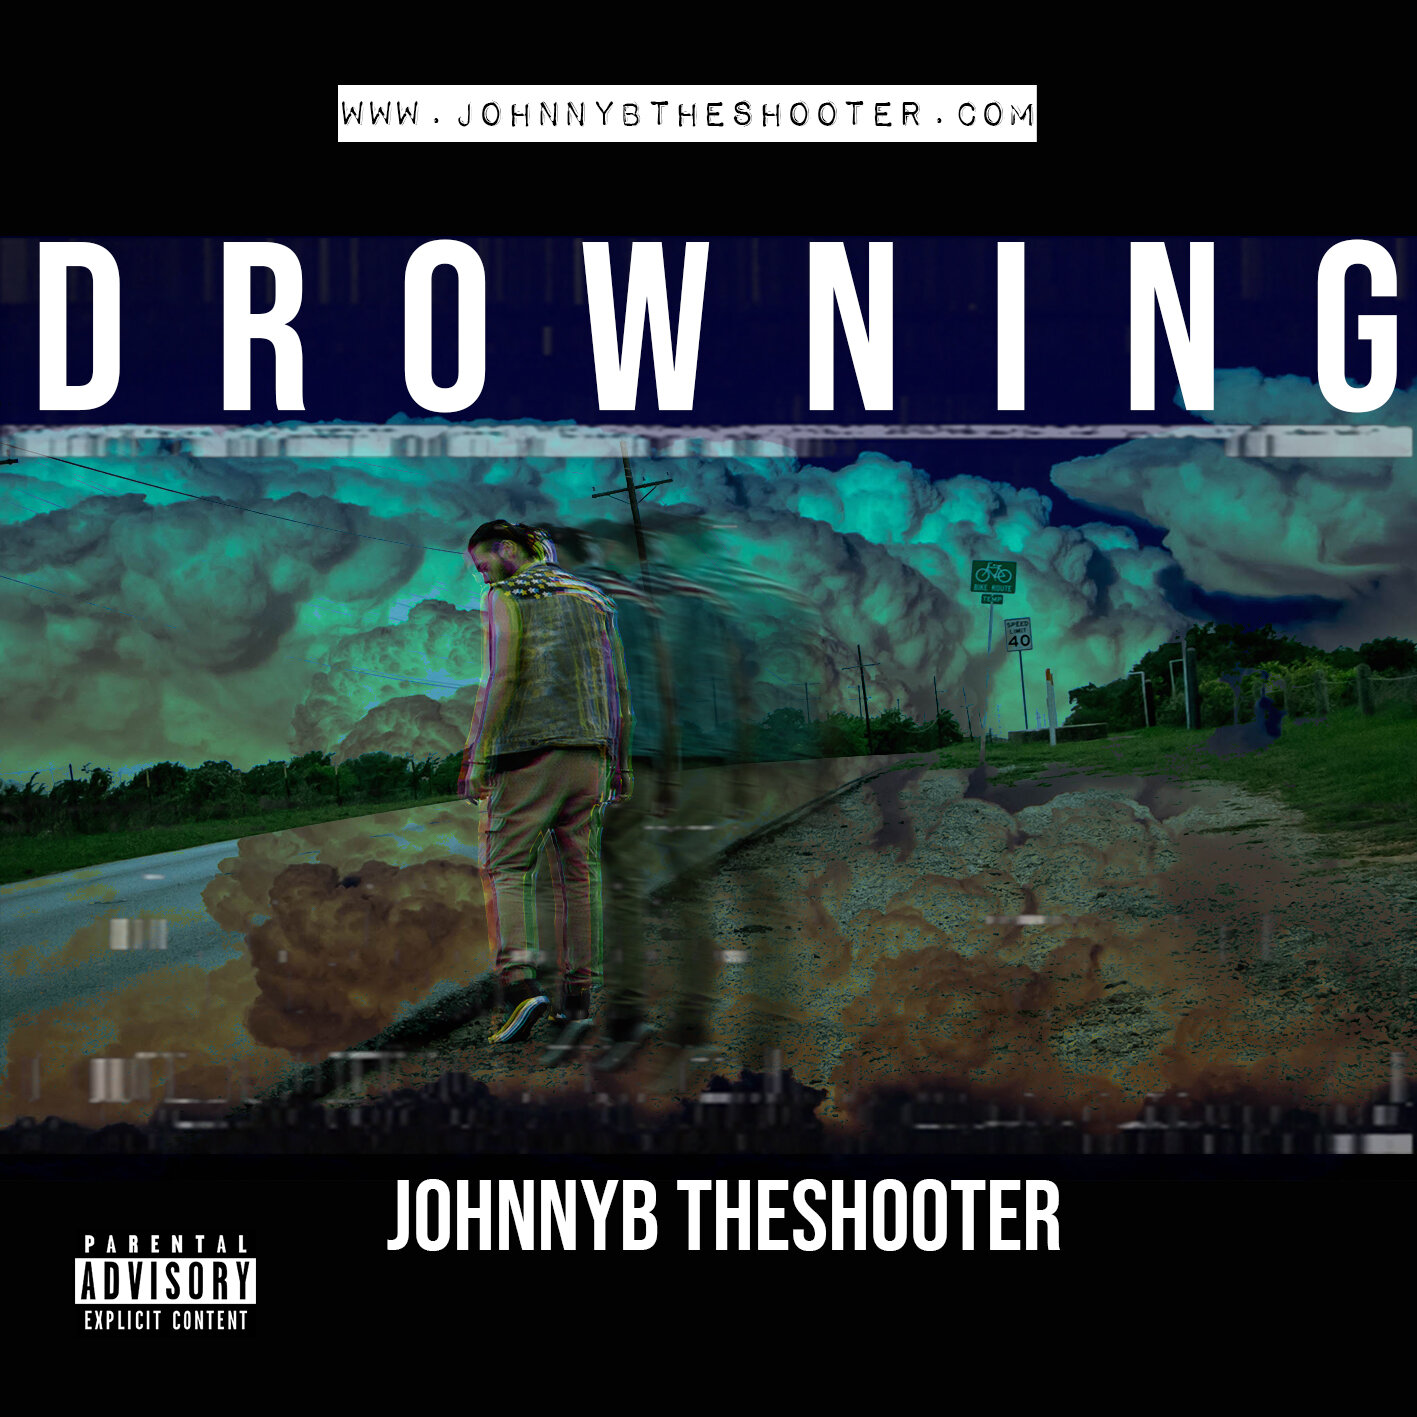 Drowning - JohnnyB theShooter COVER.jpg